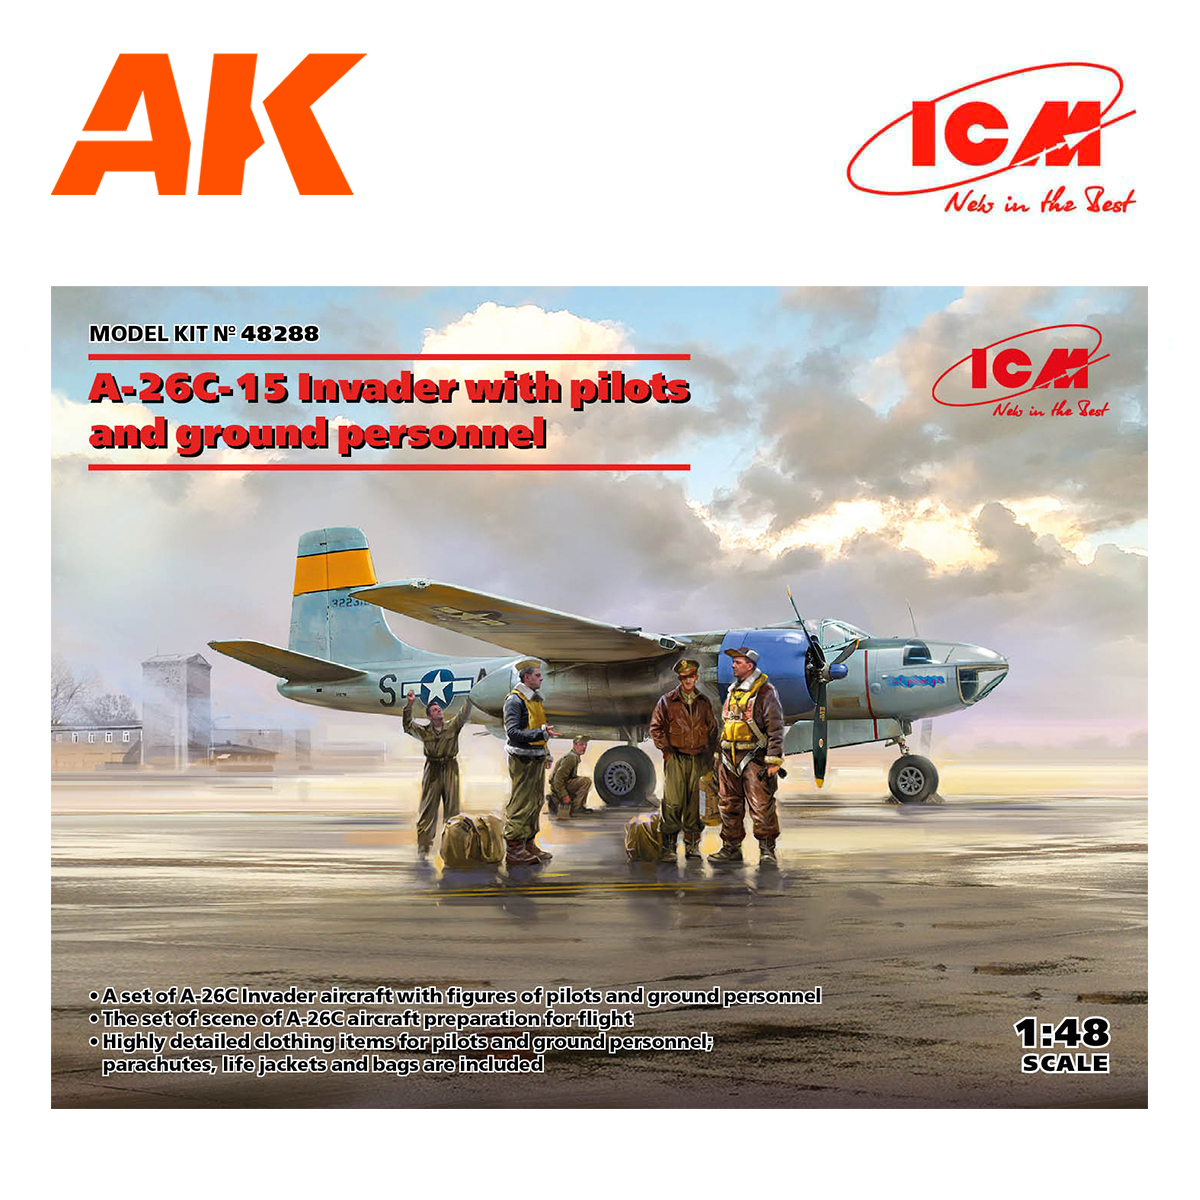 A-26C-15 Invader with pilots and ground personnel 1/48